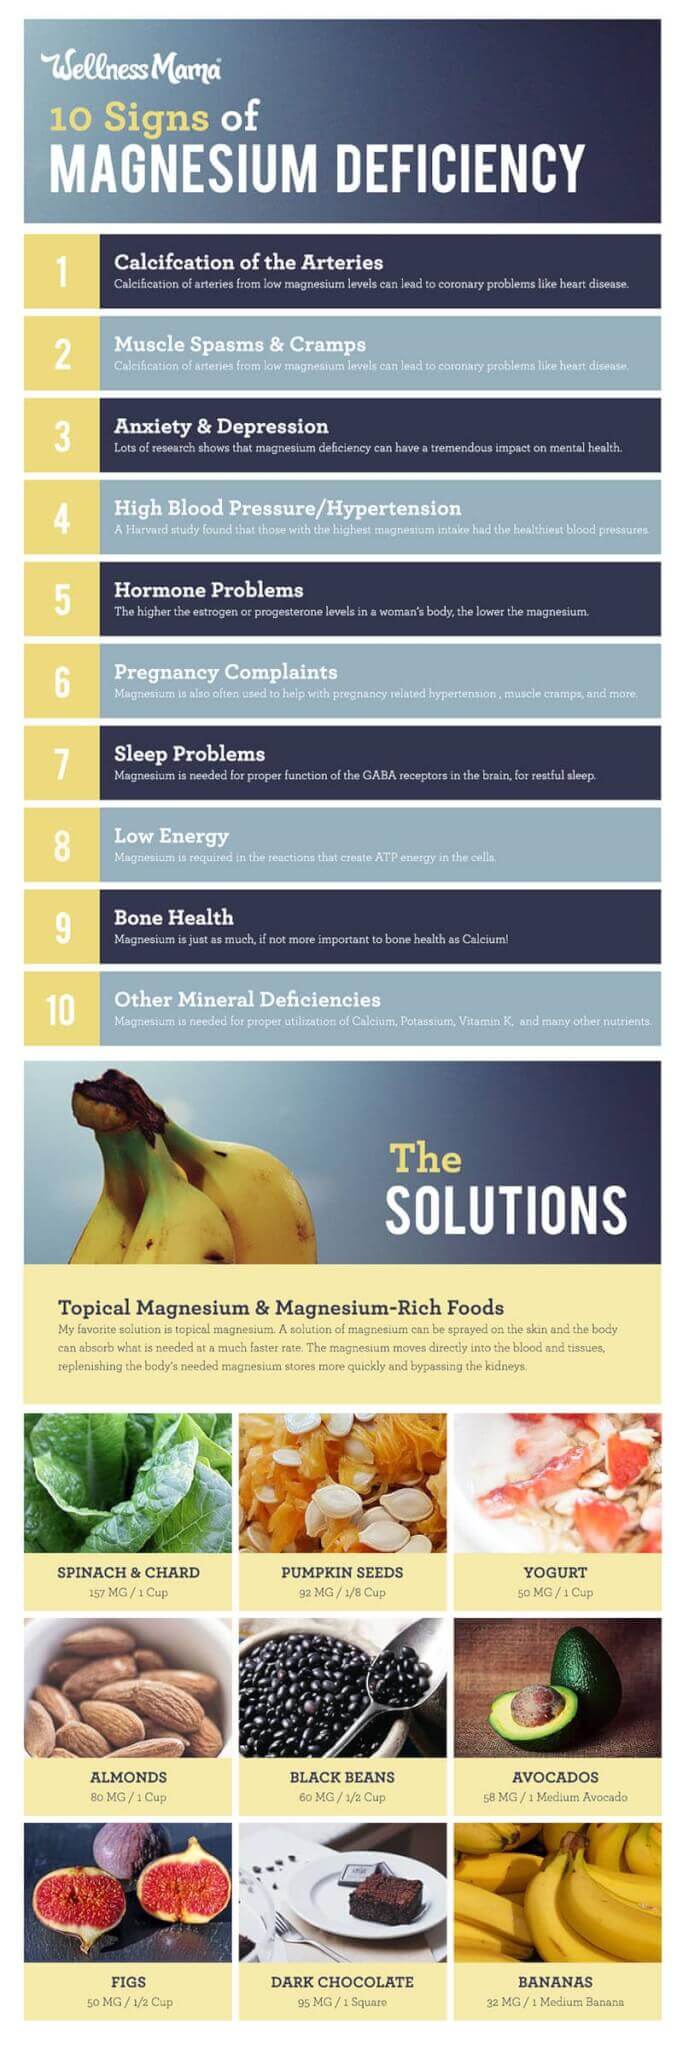 Magnesium deficiency can lead to health problems. Find out the best source of magnesium and how to optimize your magnesium levels.